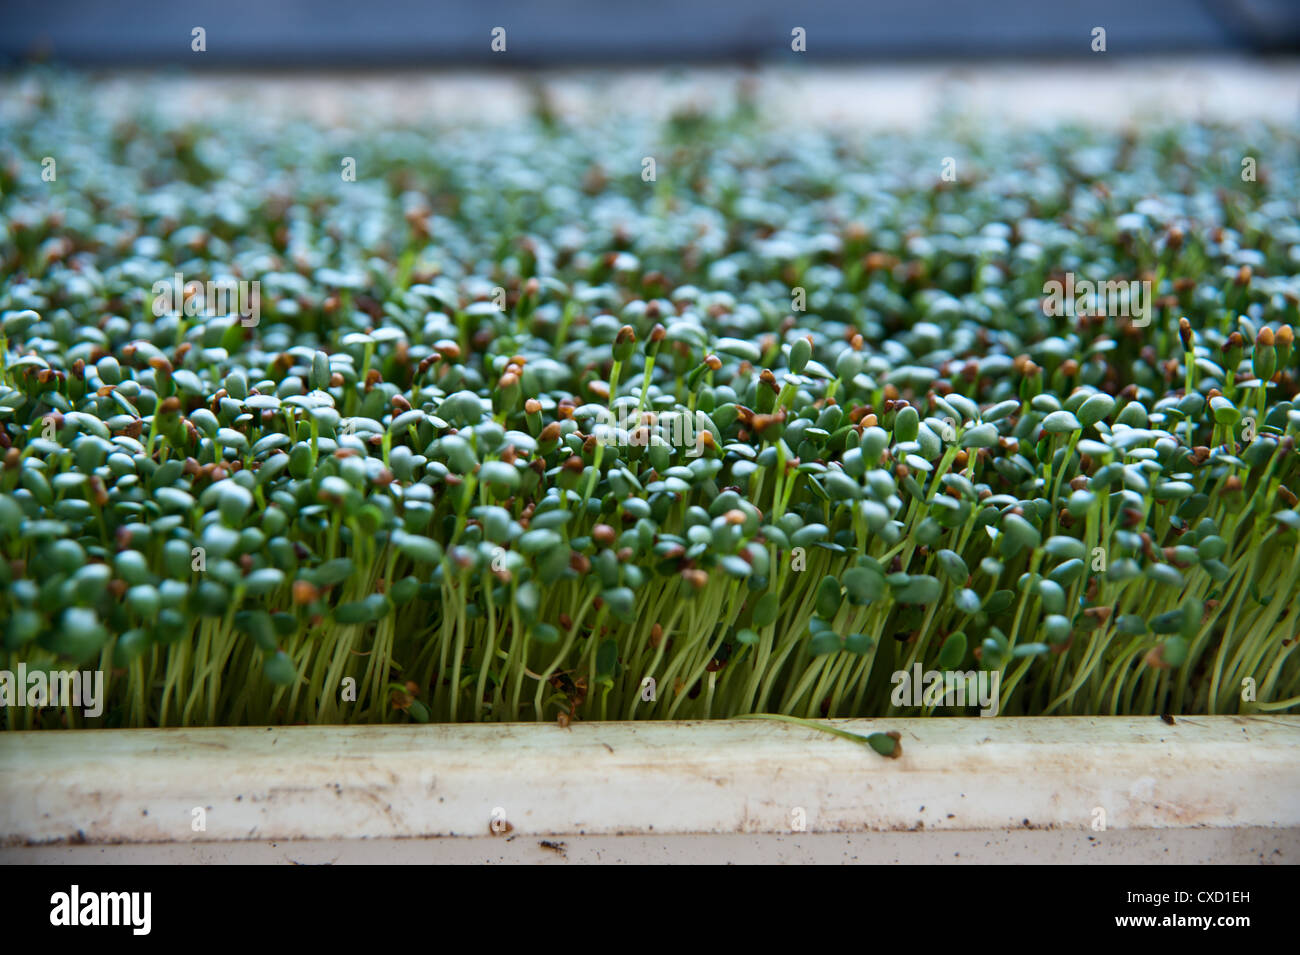 Bean Sprouts close up on an organic farm Stock Photo